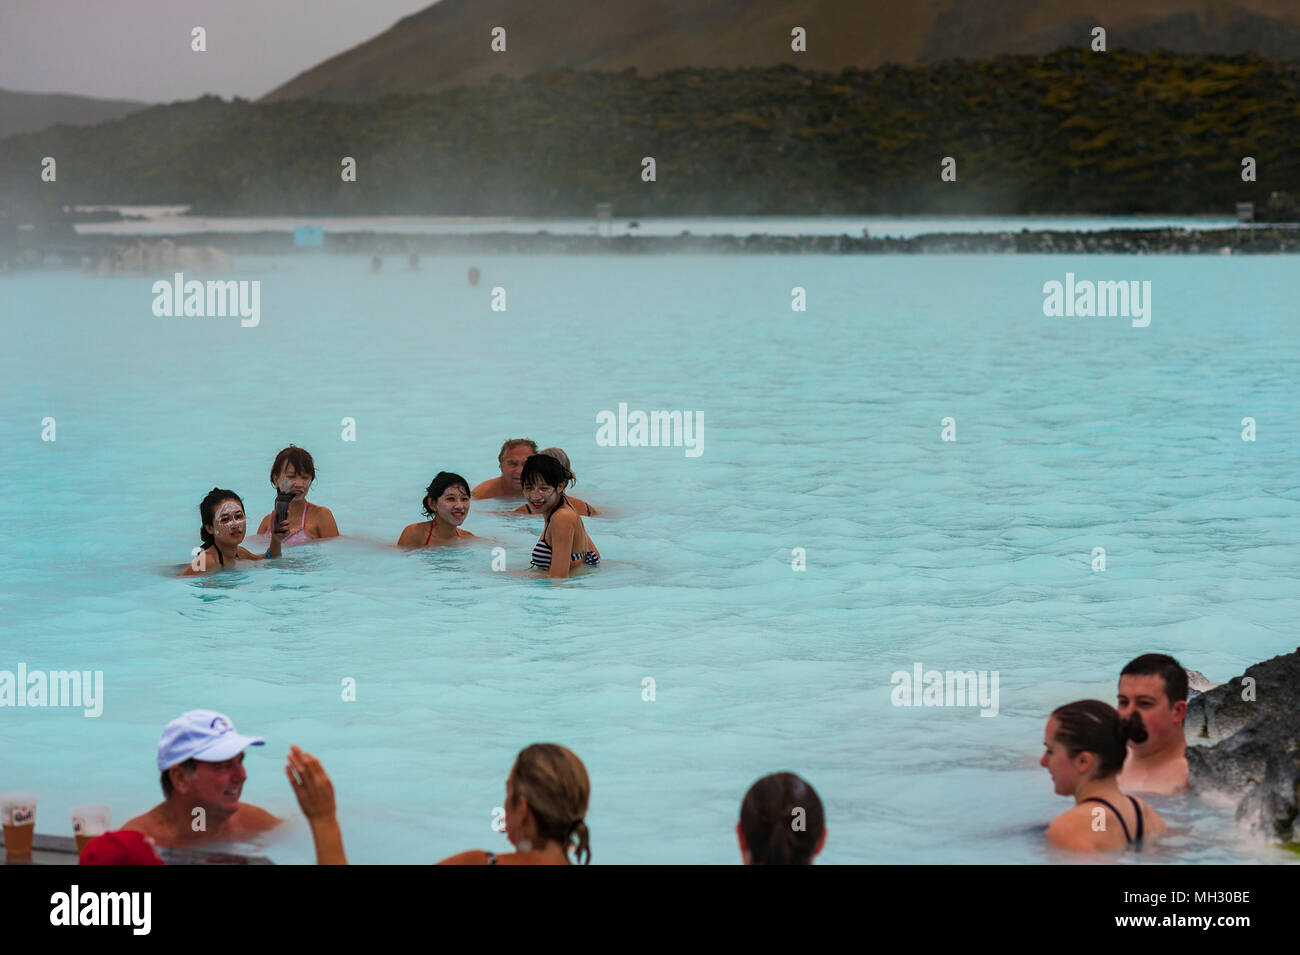 Tourists And Visitors Enjoy Outdoor Geothermal Swimming Pool At The